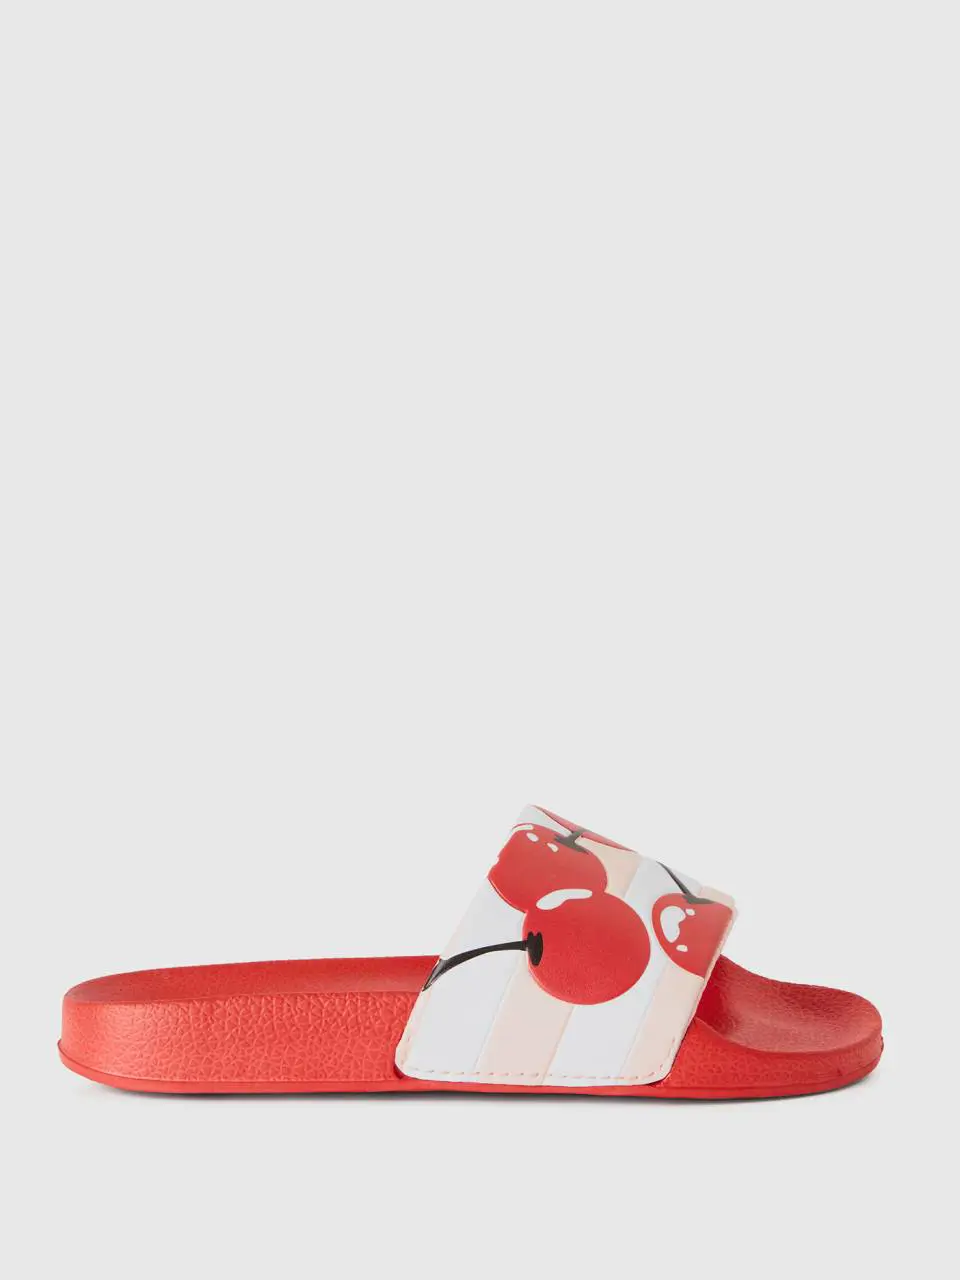 Benetton slippers with cherry print. 1